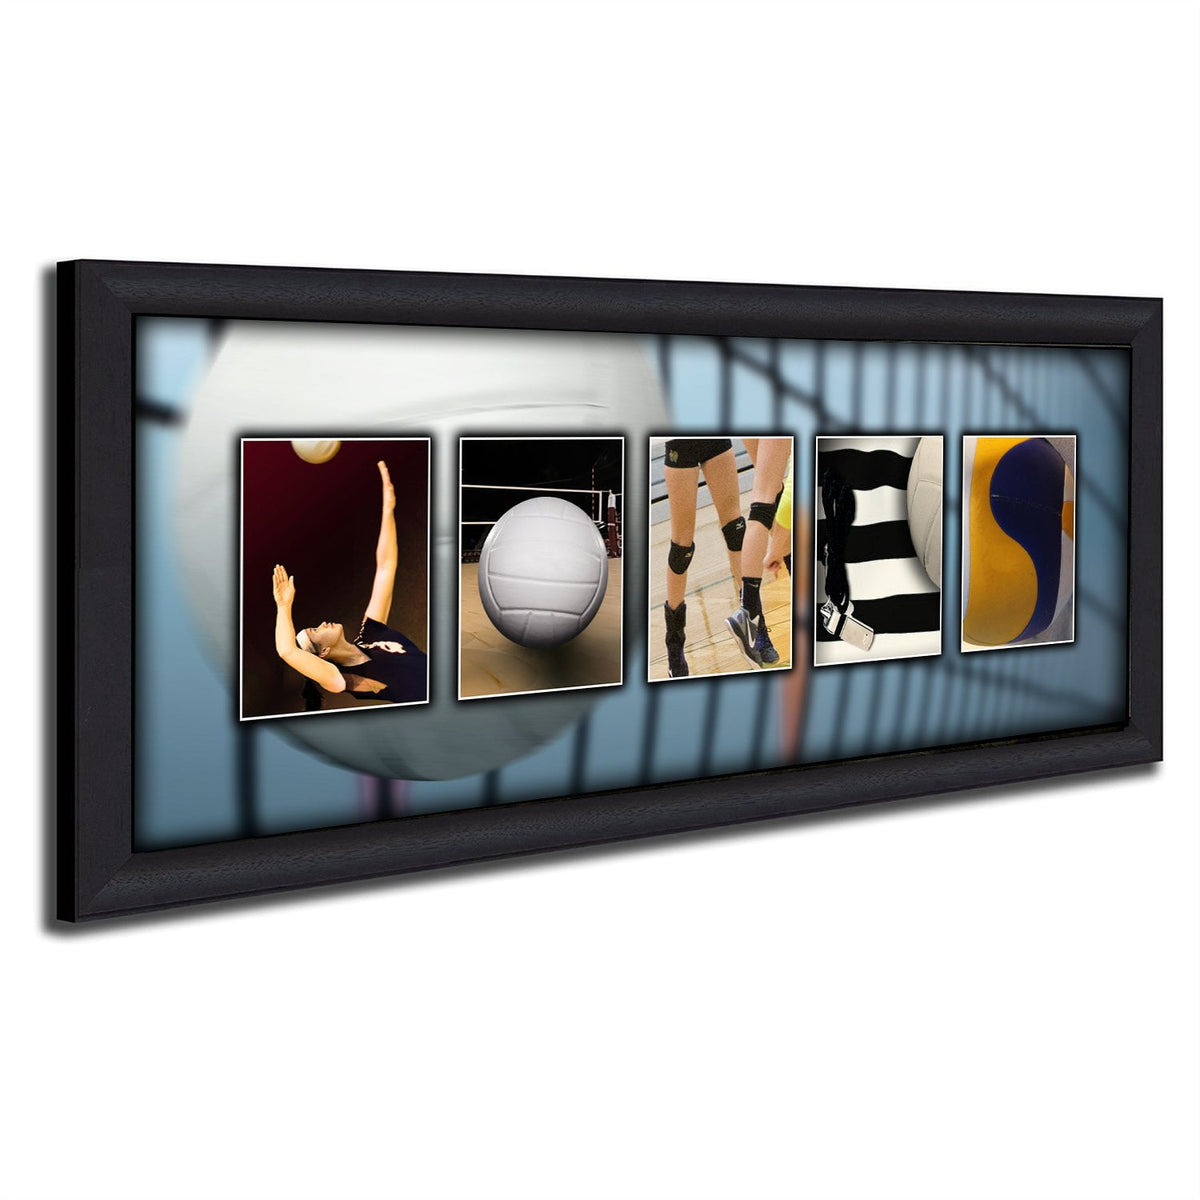 Personalized volleyball gift idea - framed canvas art from personal prints